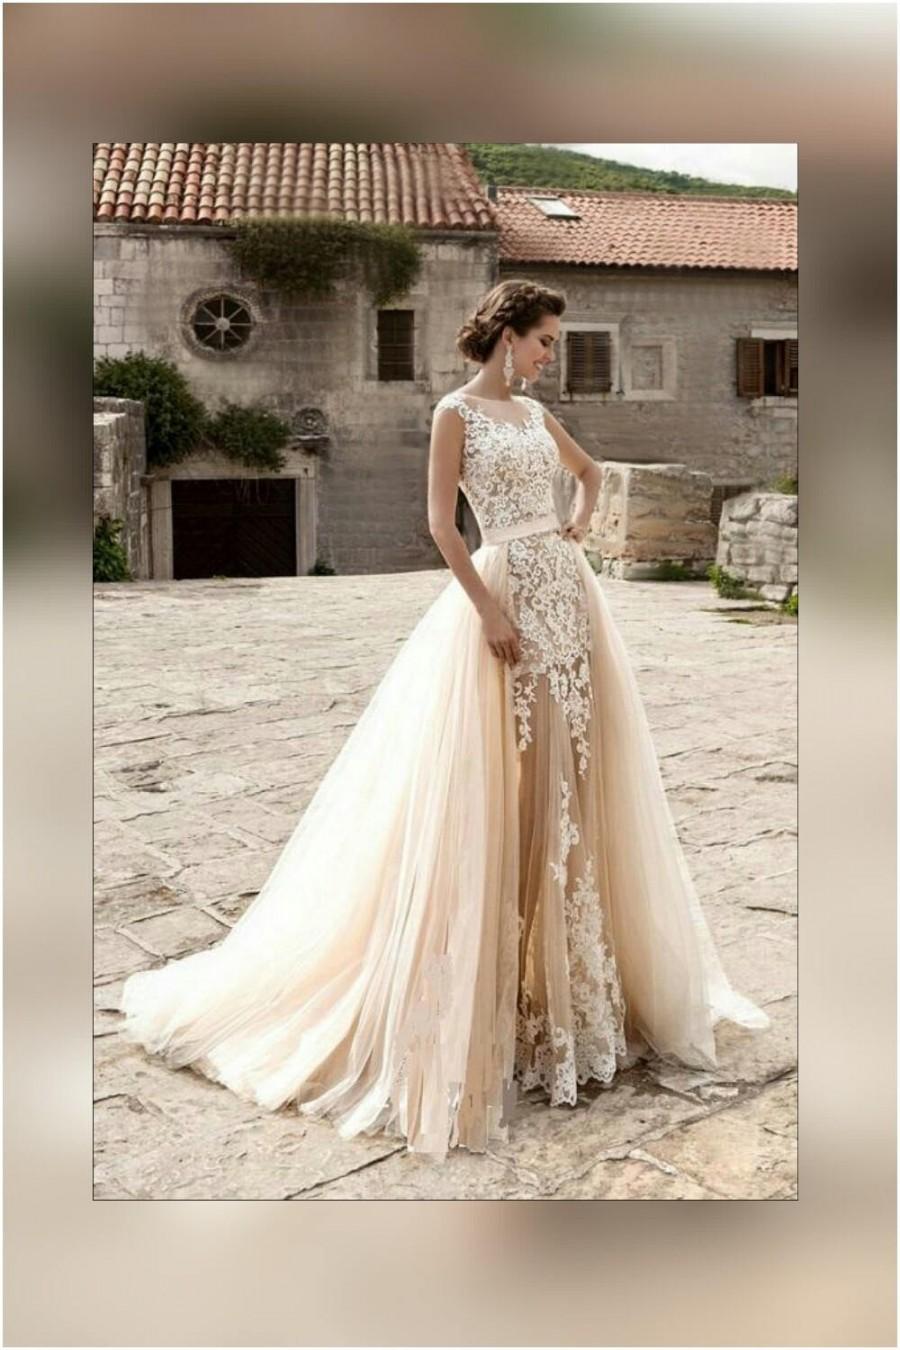 Wedding - Wedding dress light Peach Echo and white colors with detachable train, tulle bridal removable skirt with train